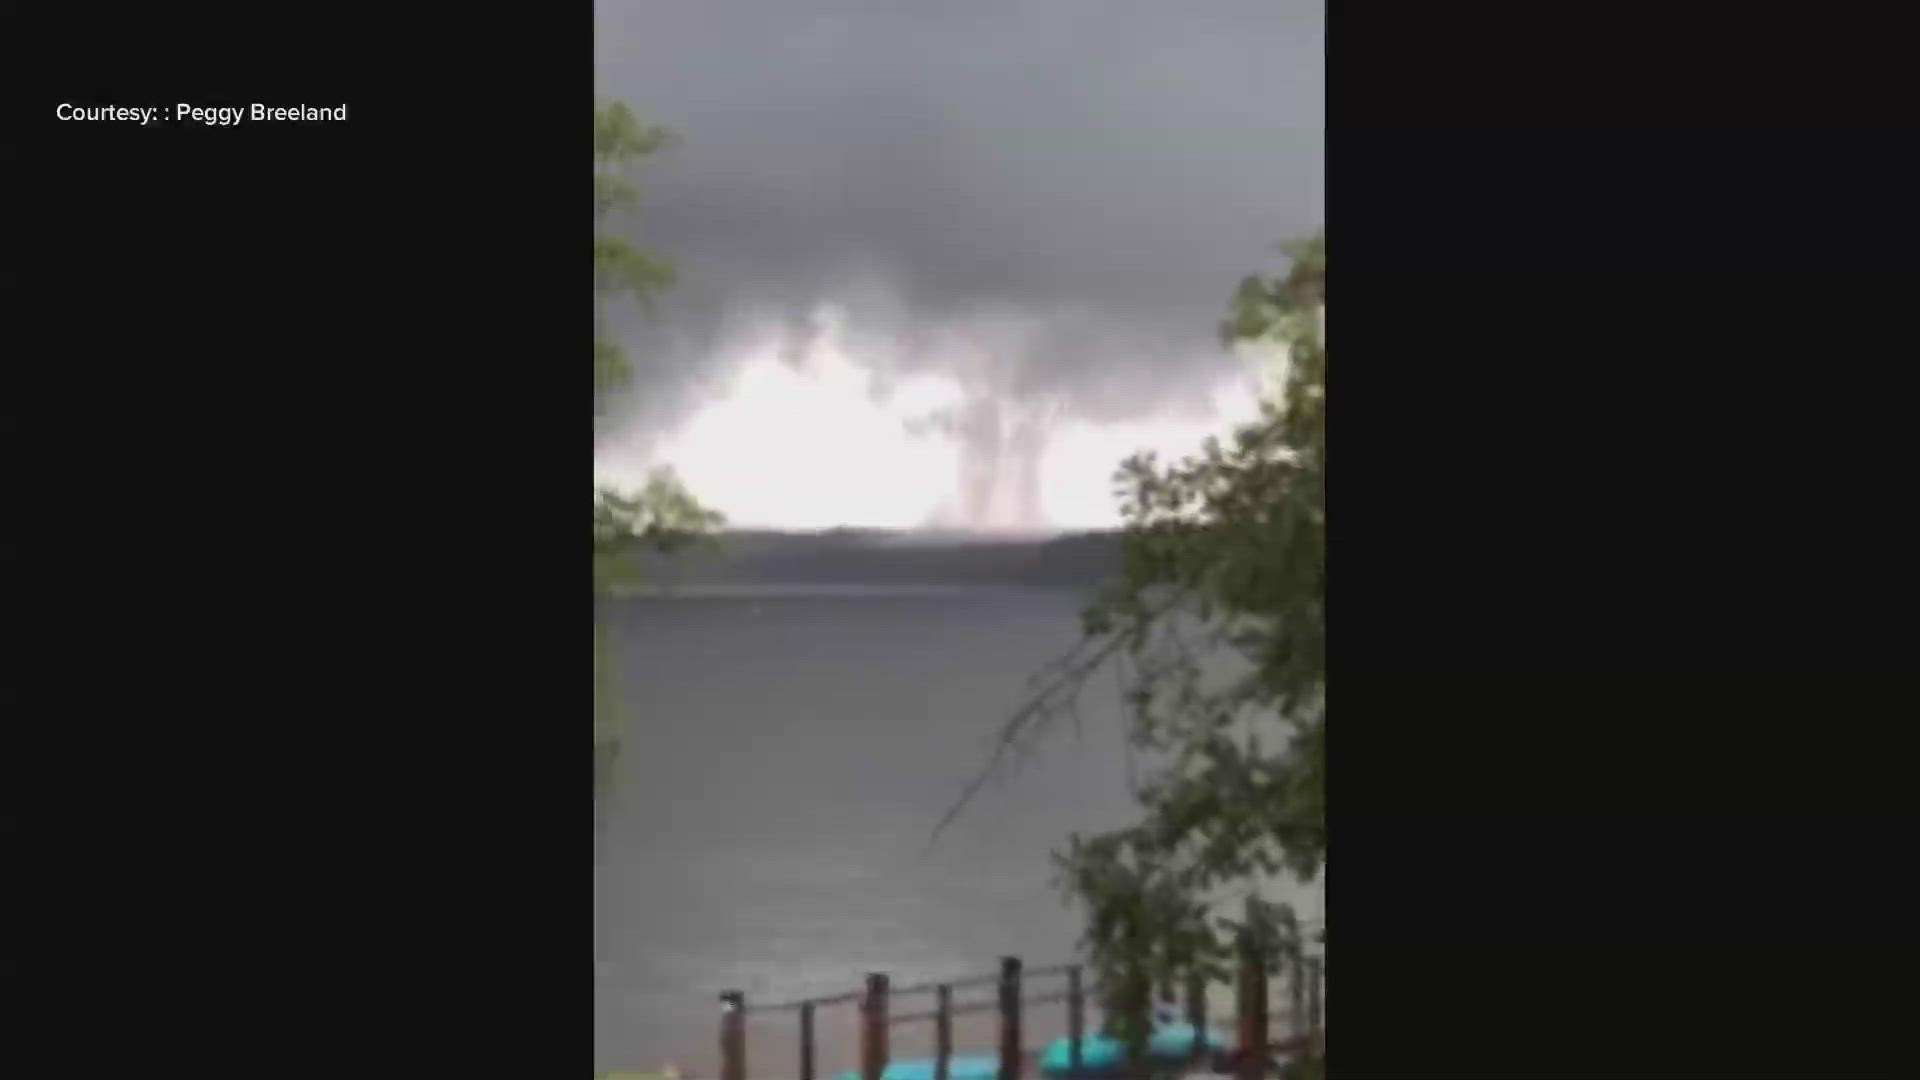 The weather service says the funnel touched down about 3:50 p.m. near Dreher Island State Park.  There are reports of some damage in that area.